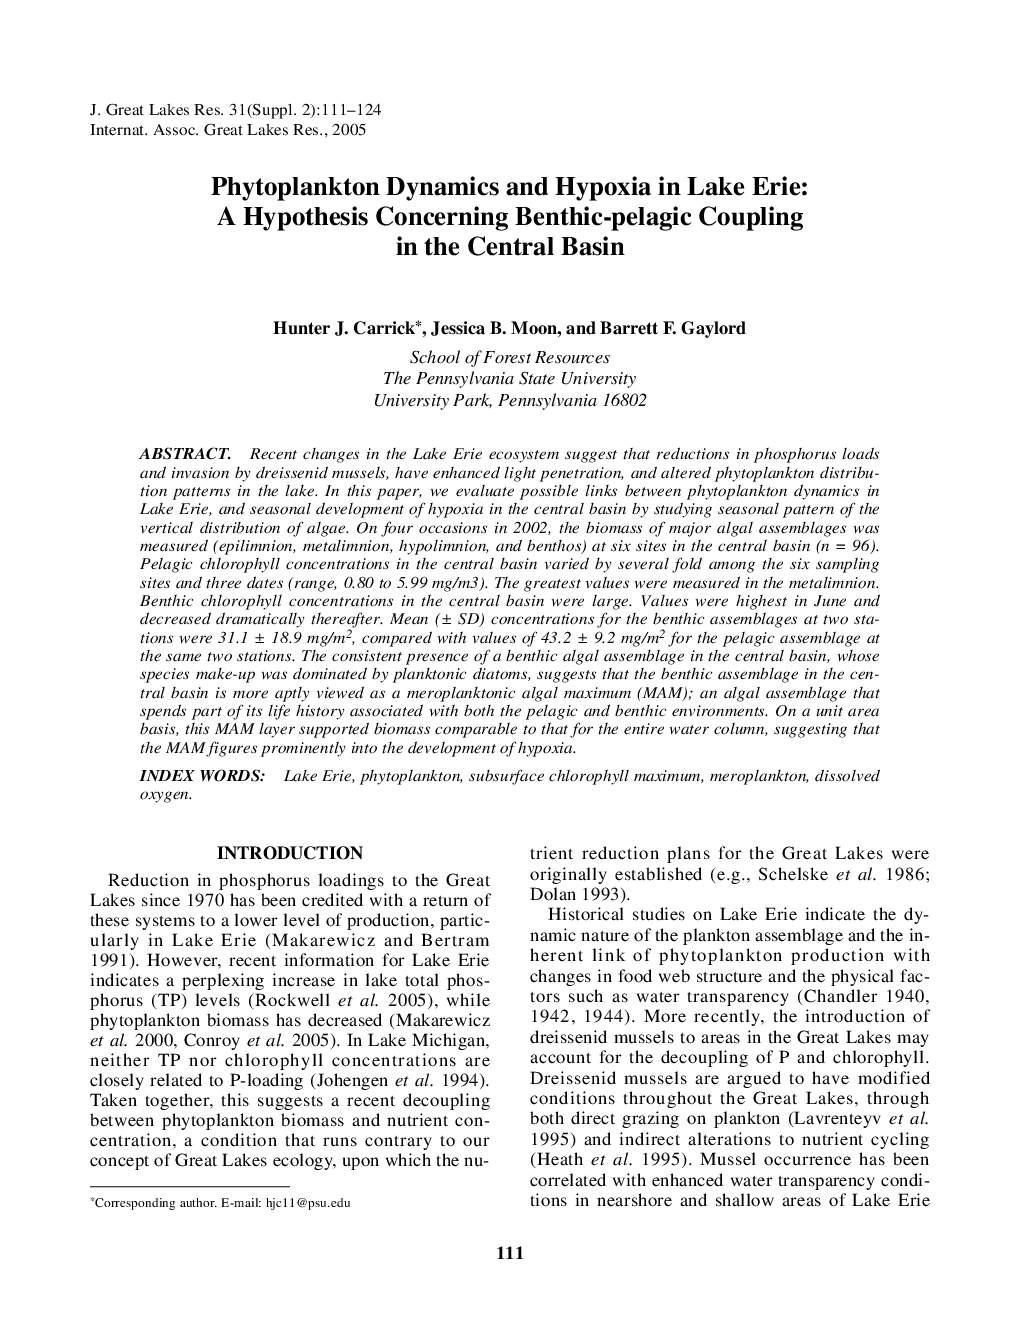 Phytoplankton Dynamics and Hypoxia in Lake Erie: A Hypothesis Concerning Benthic-pelagic Coupling in the Central Basin